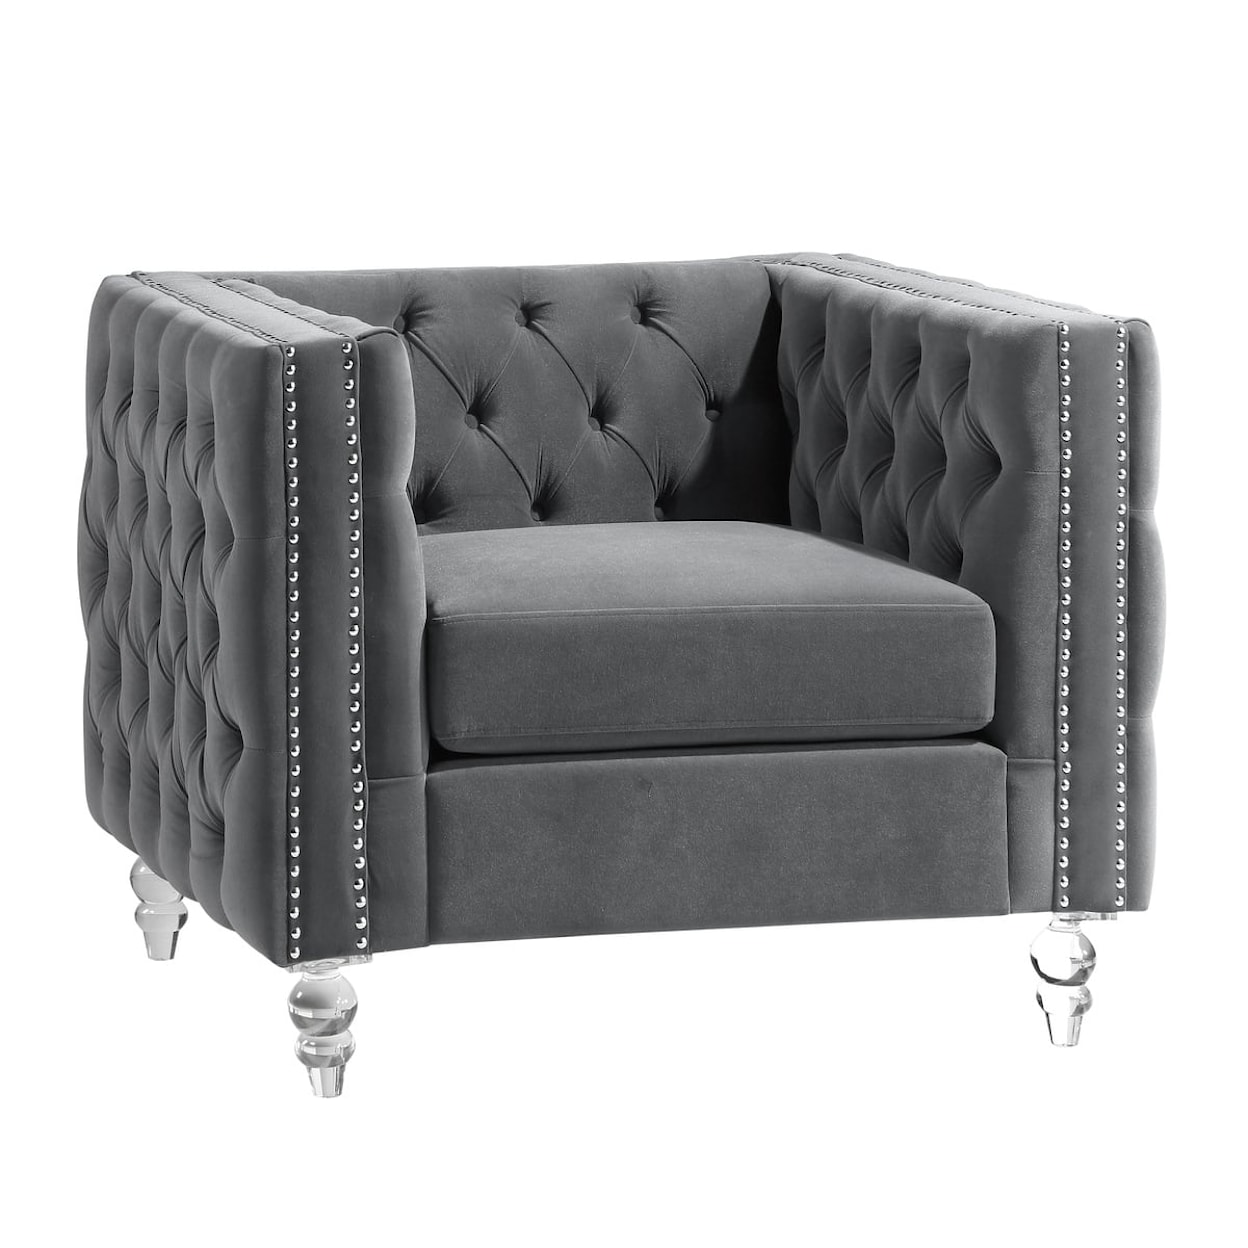 Homelegance Orina Button-Tufted Stationary Chair